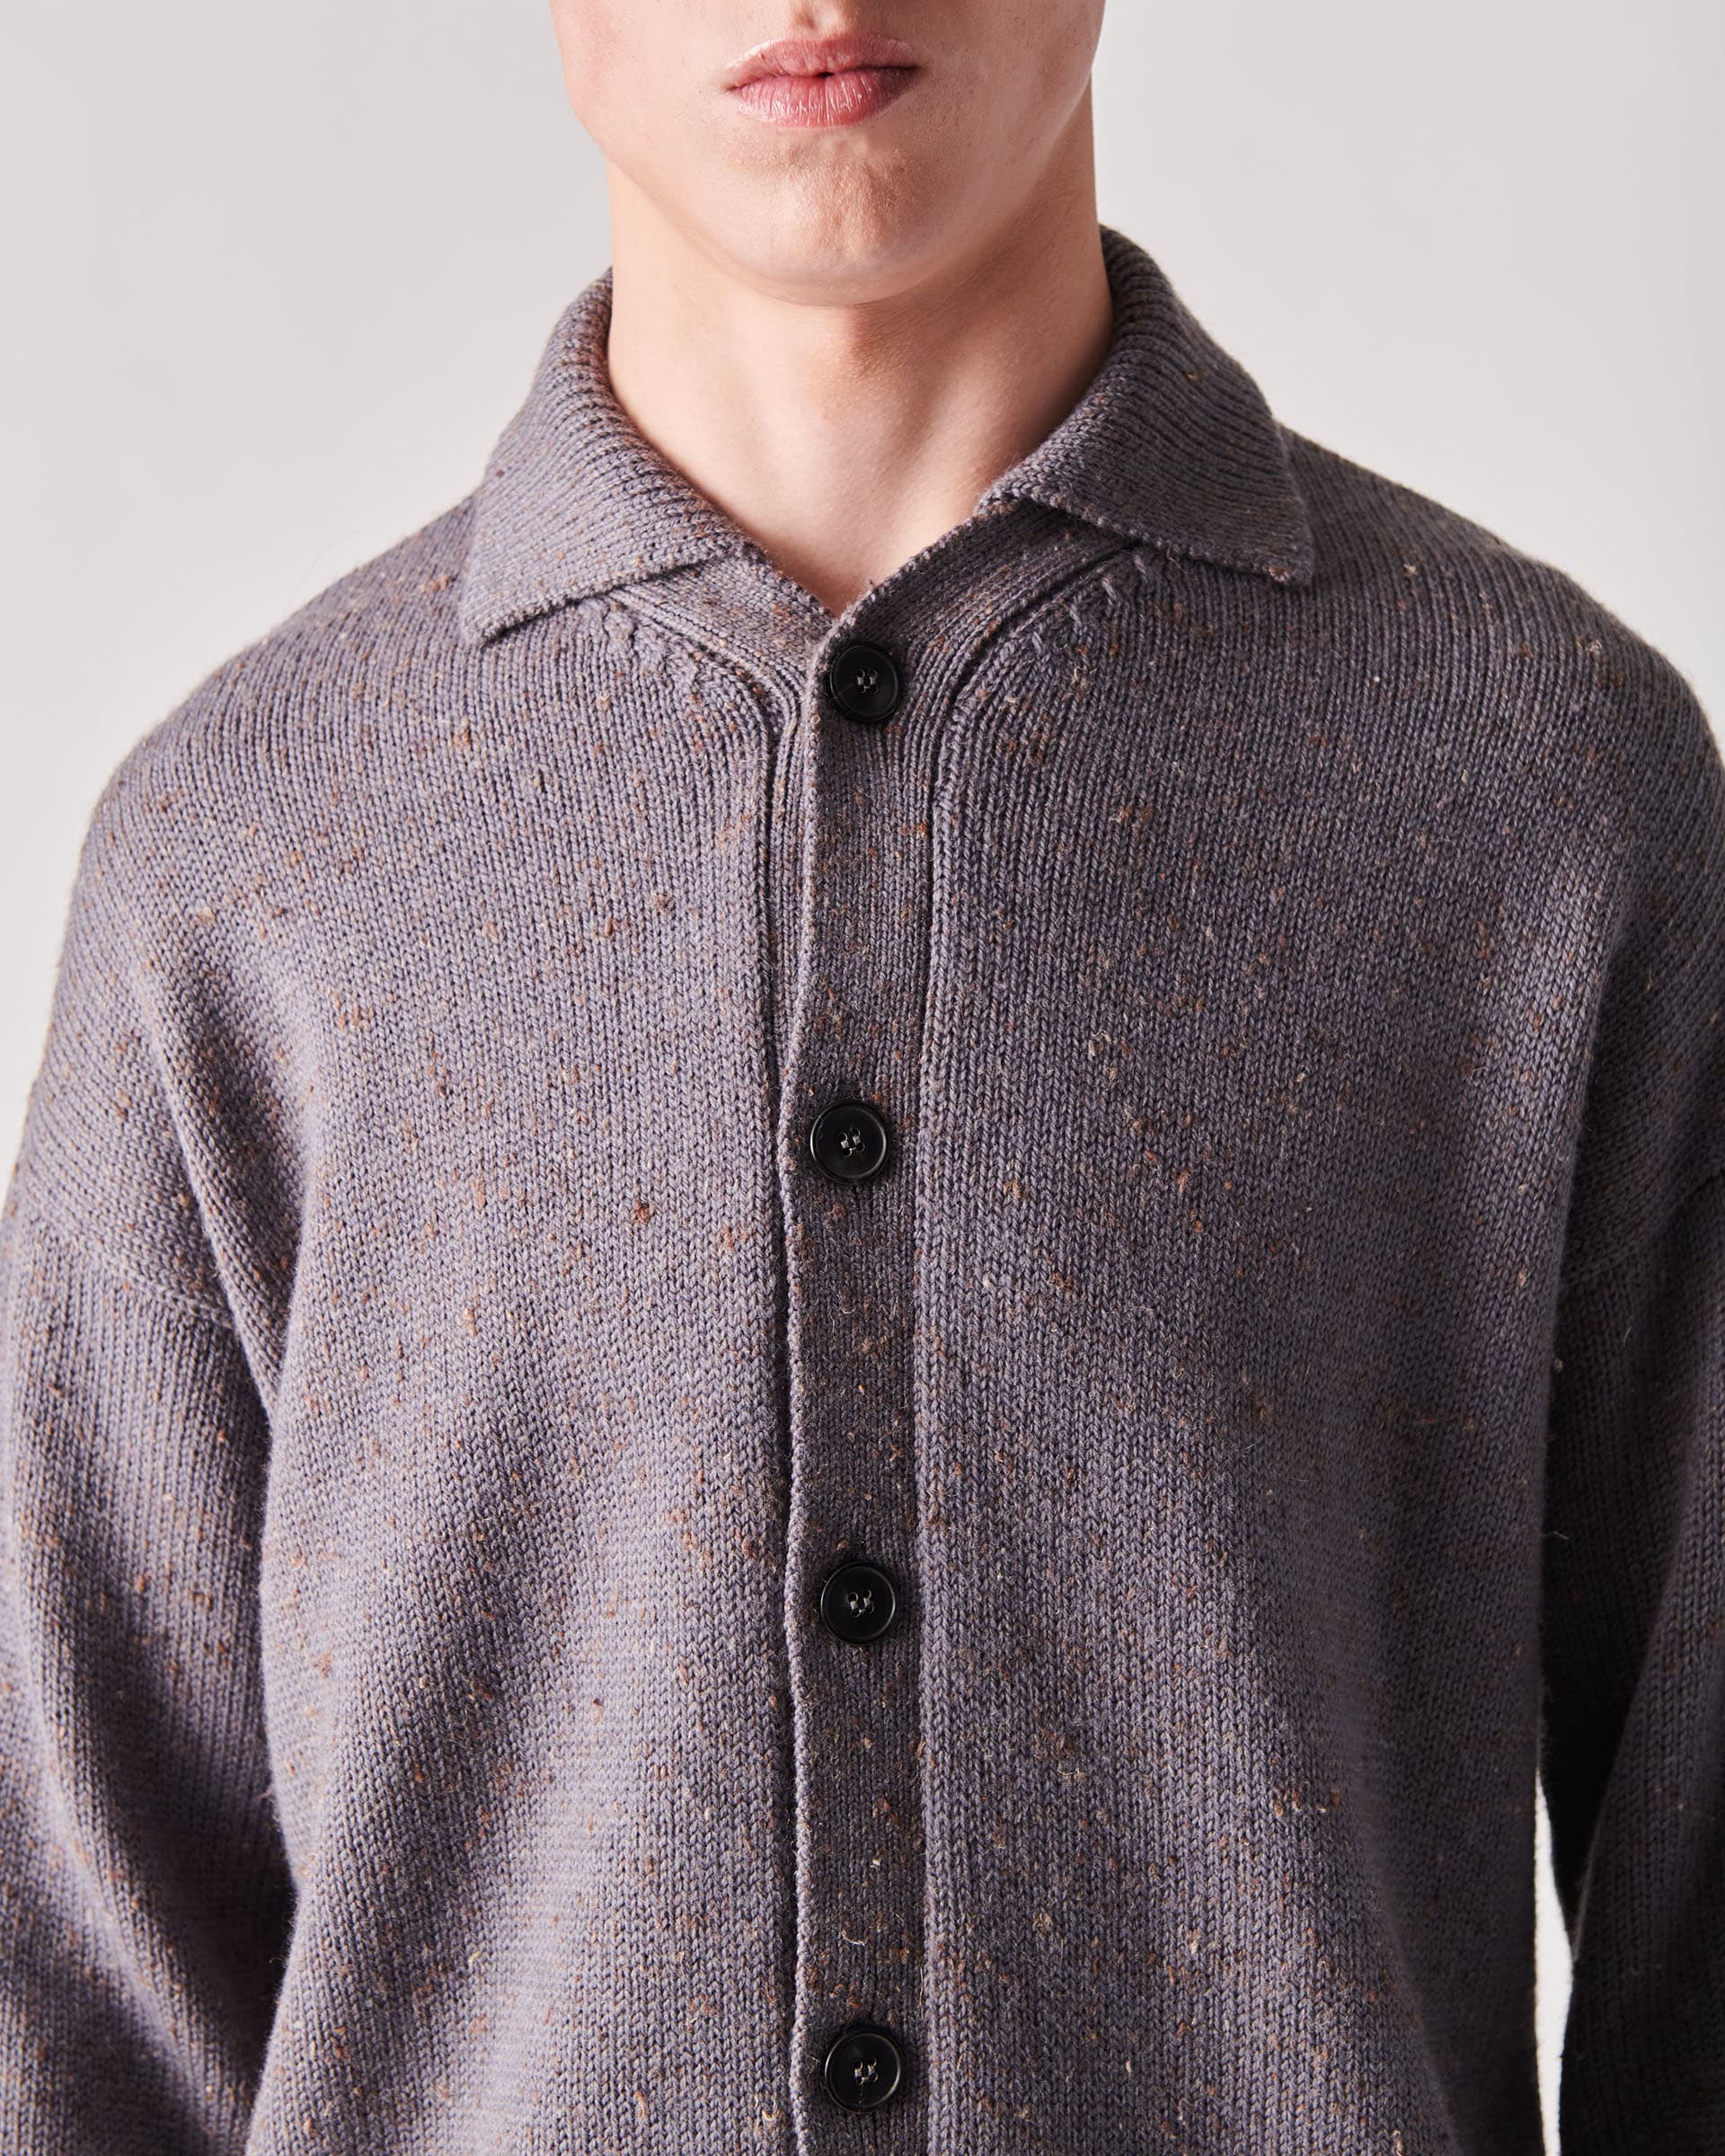 The Market Store | Cardigan Sweater With Shirt Collar